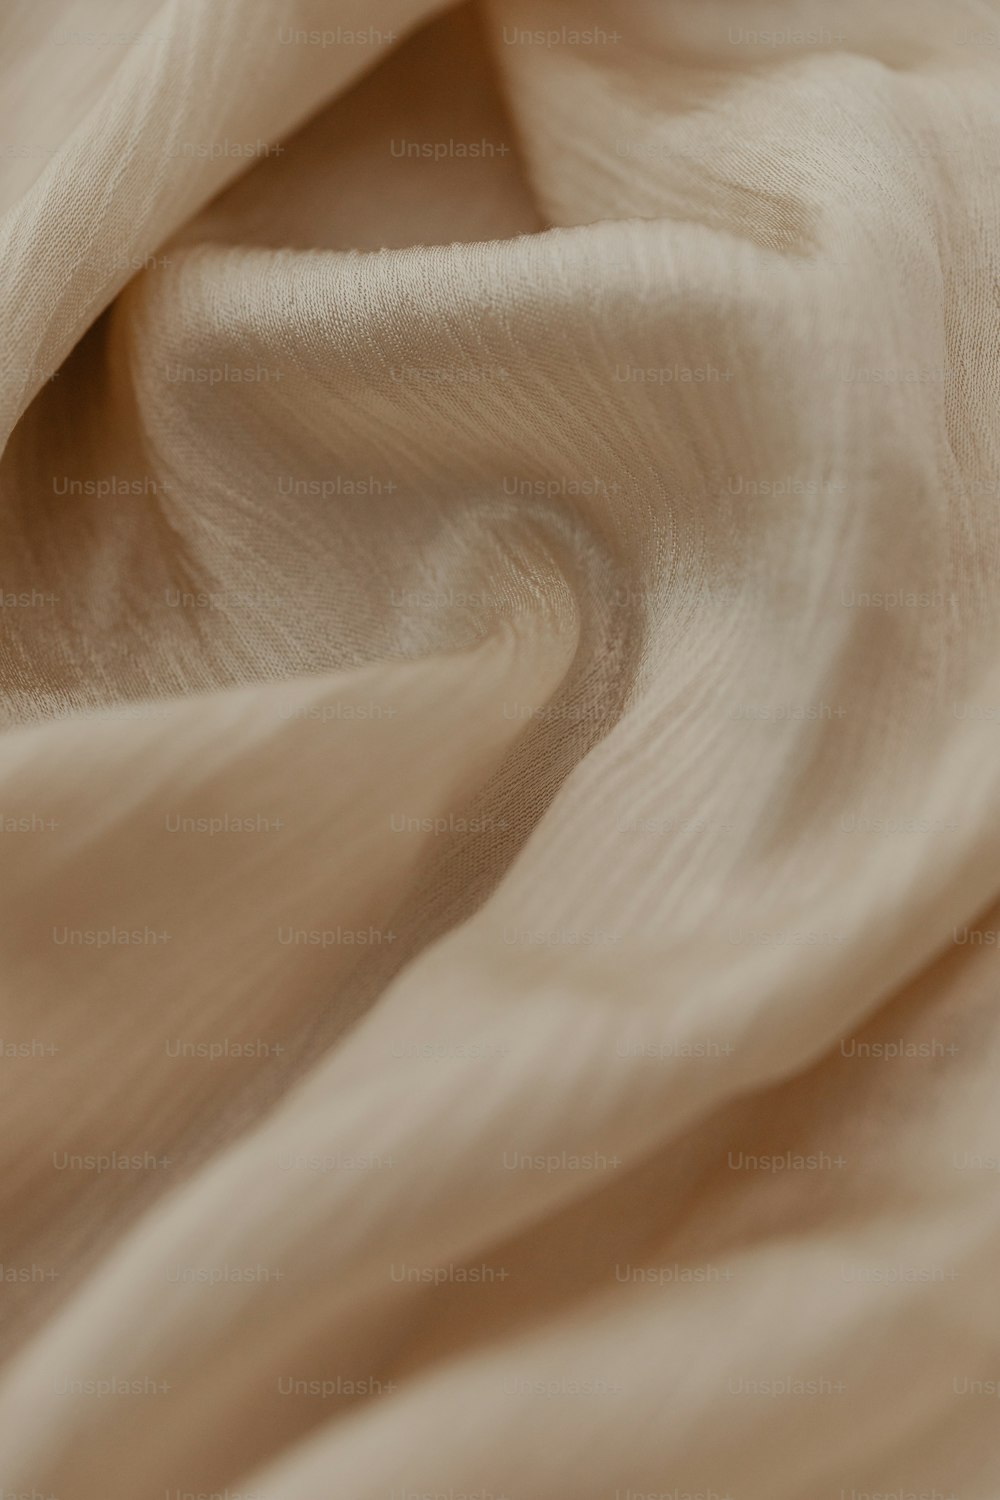 a close up view of a beige fabric